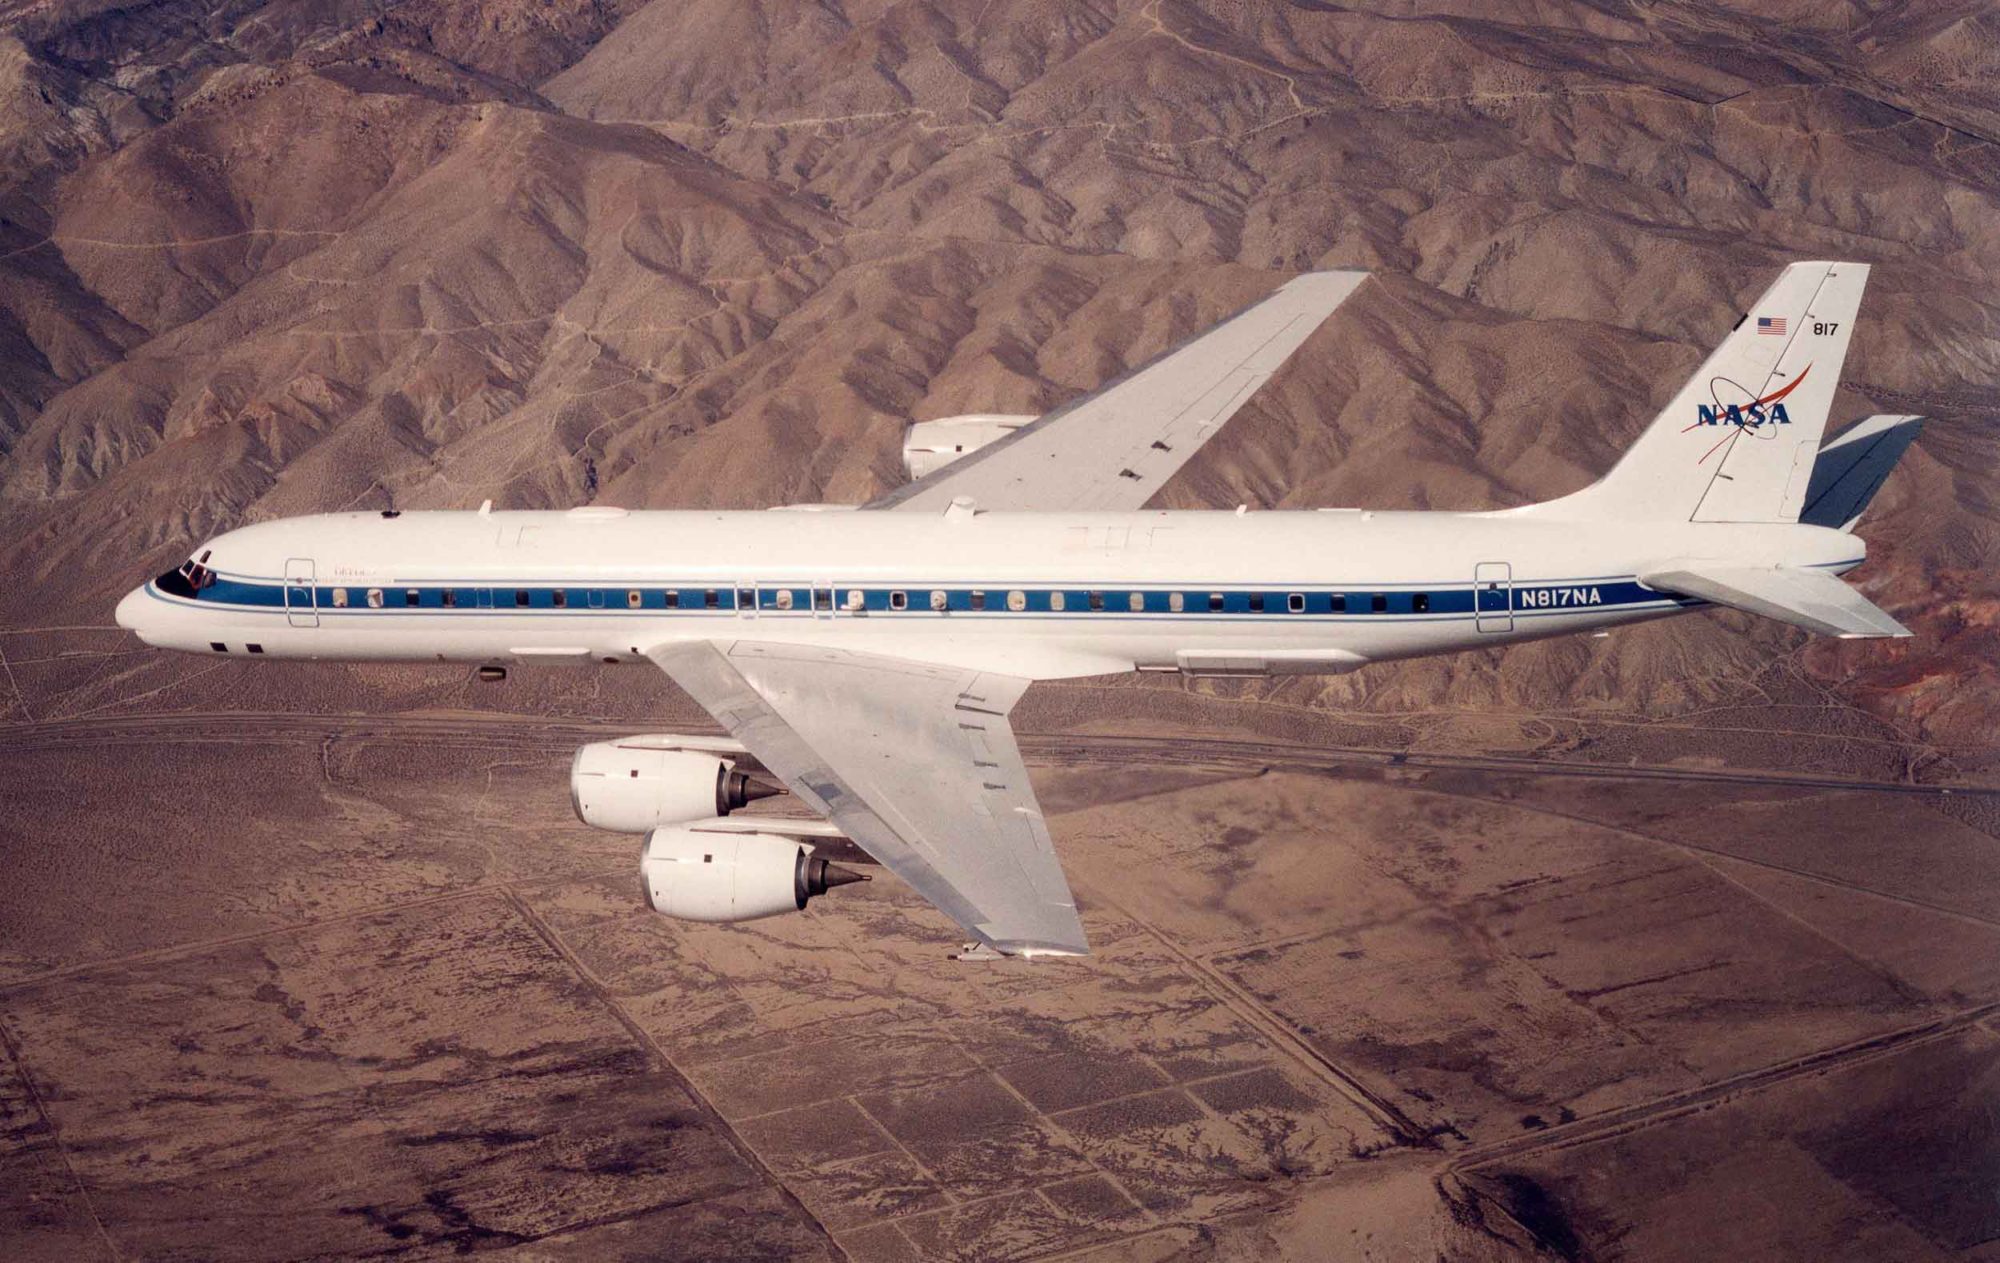 DC-8 Airborne Laboratory in flight - Image Credit: NASA Dryden Flight Research Center Photo Collection (http://www.dfrc.nasa.gov/gallery/photo/index.html) NASA Photo: EC00-0050-1 Date February 2000